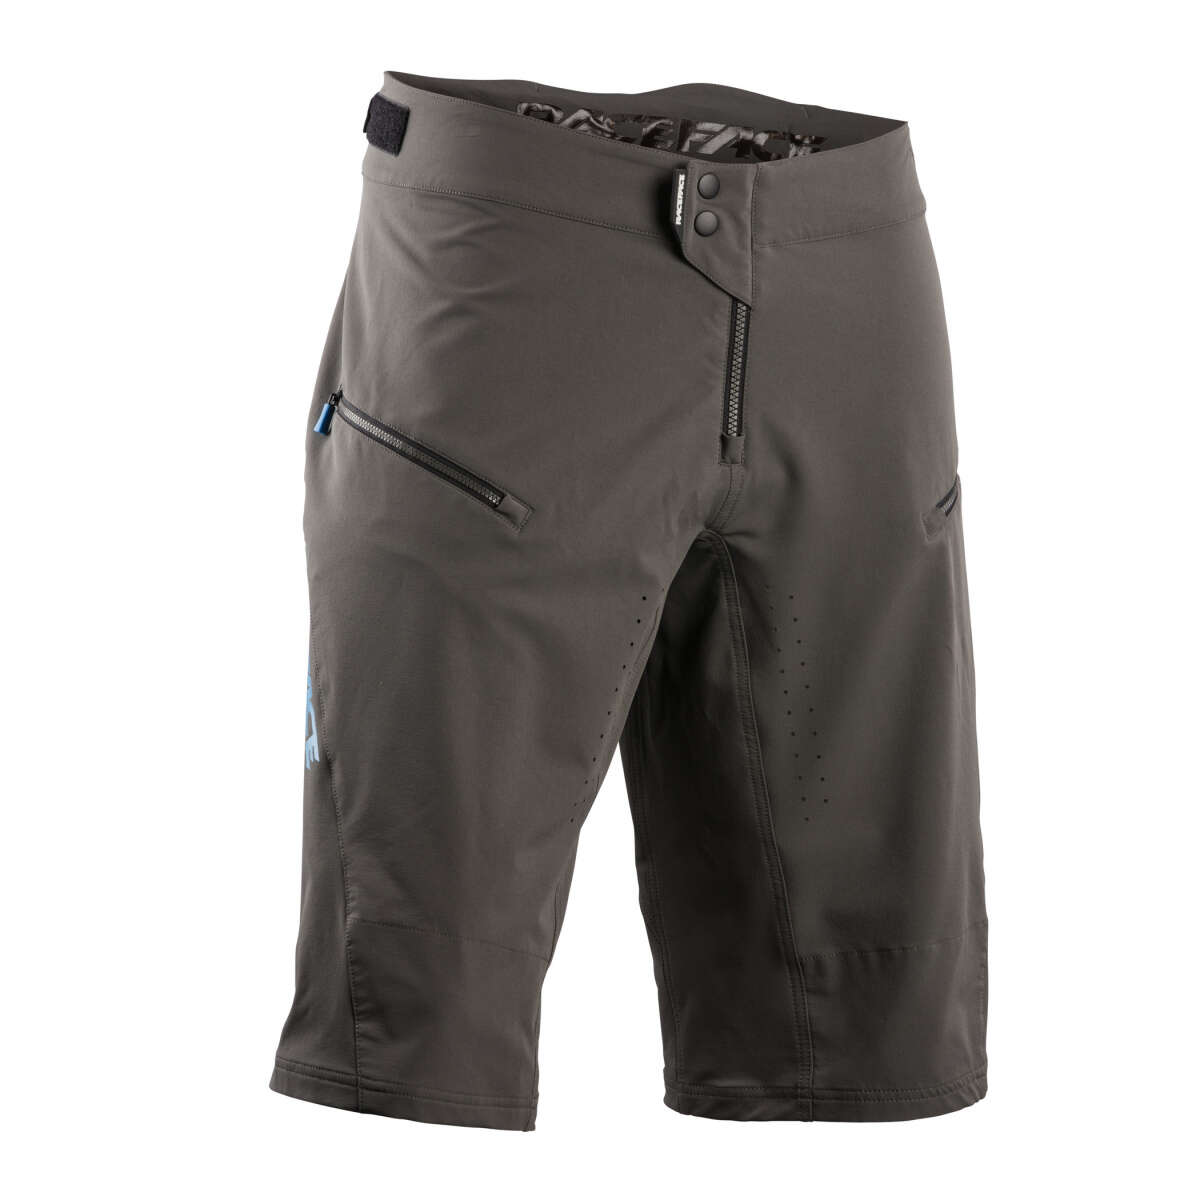 Race Face Trail Short Indy Grey